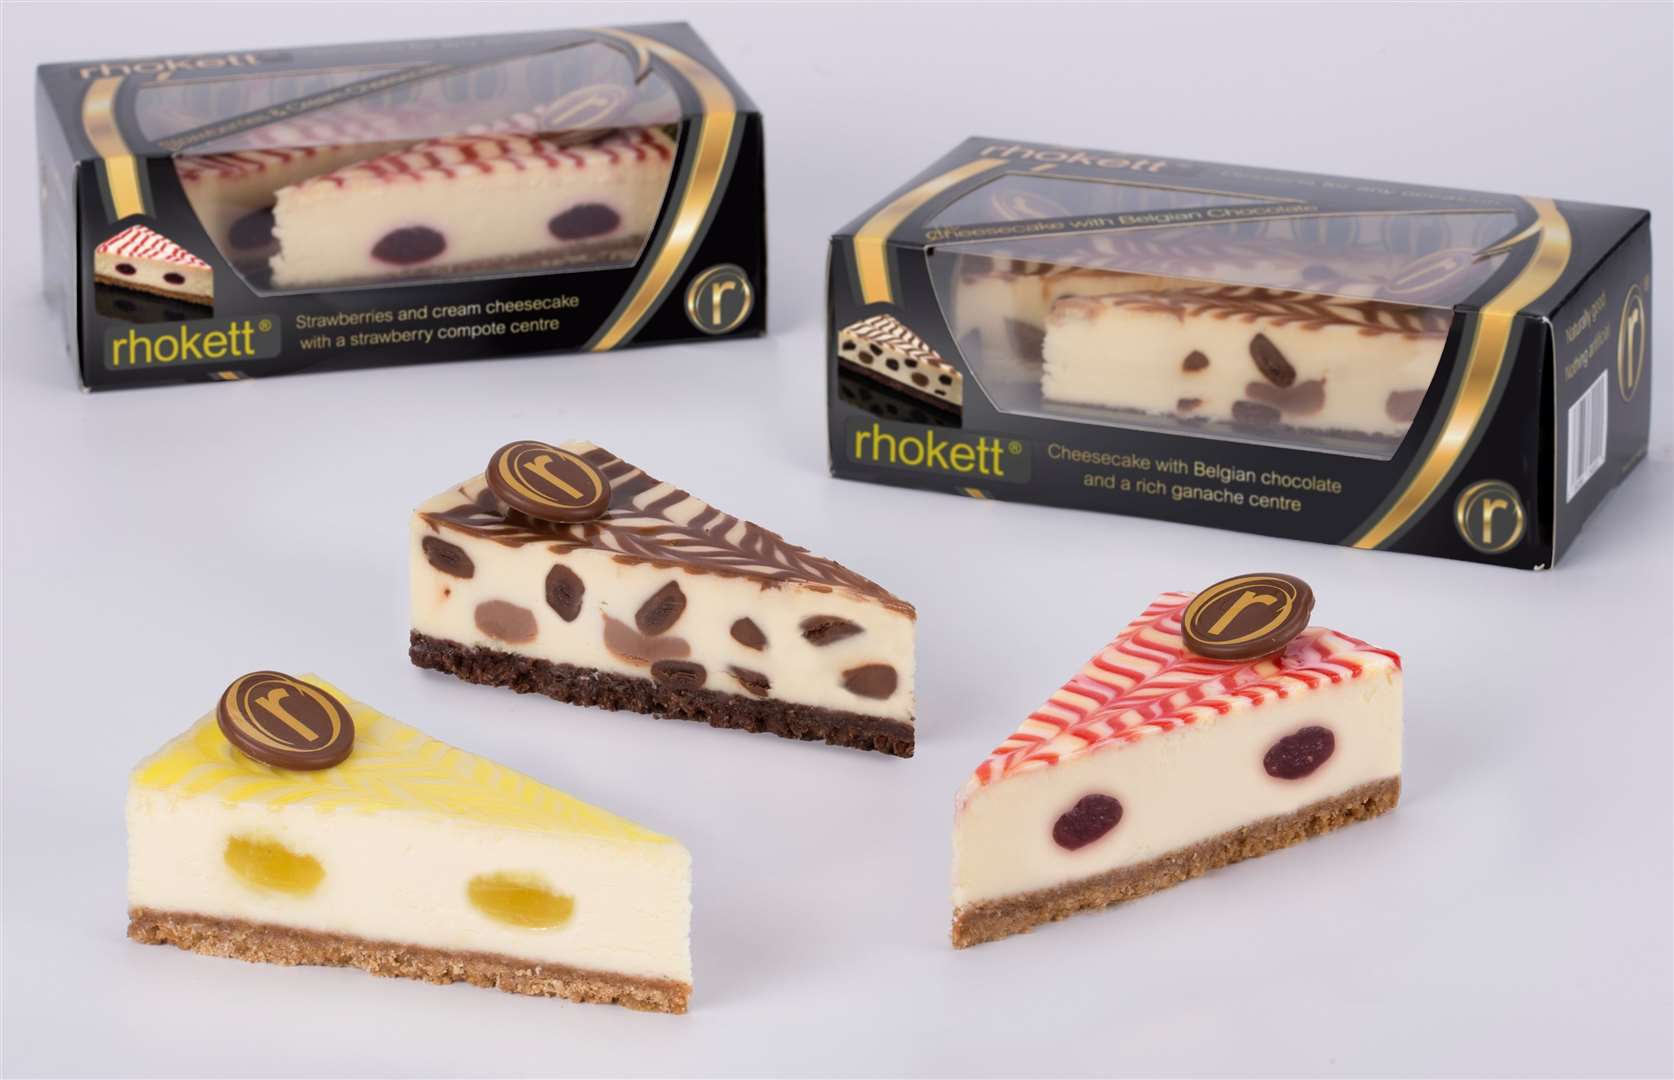 Rhokett has supplied desserts to the likes of M&S and Waitrose as well as top hotels